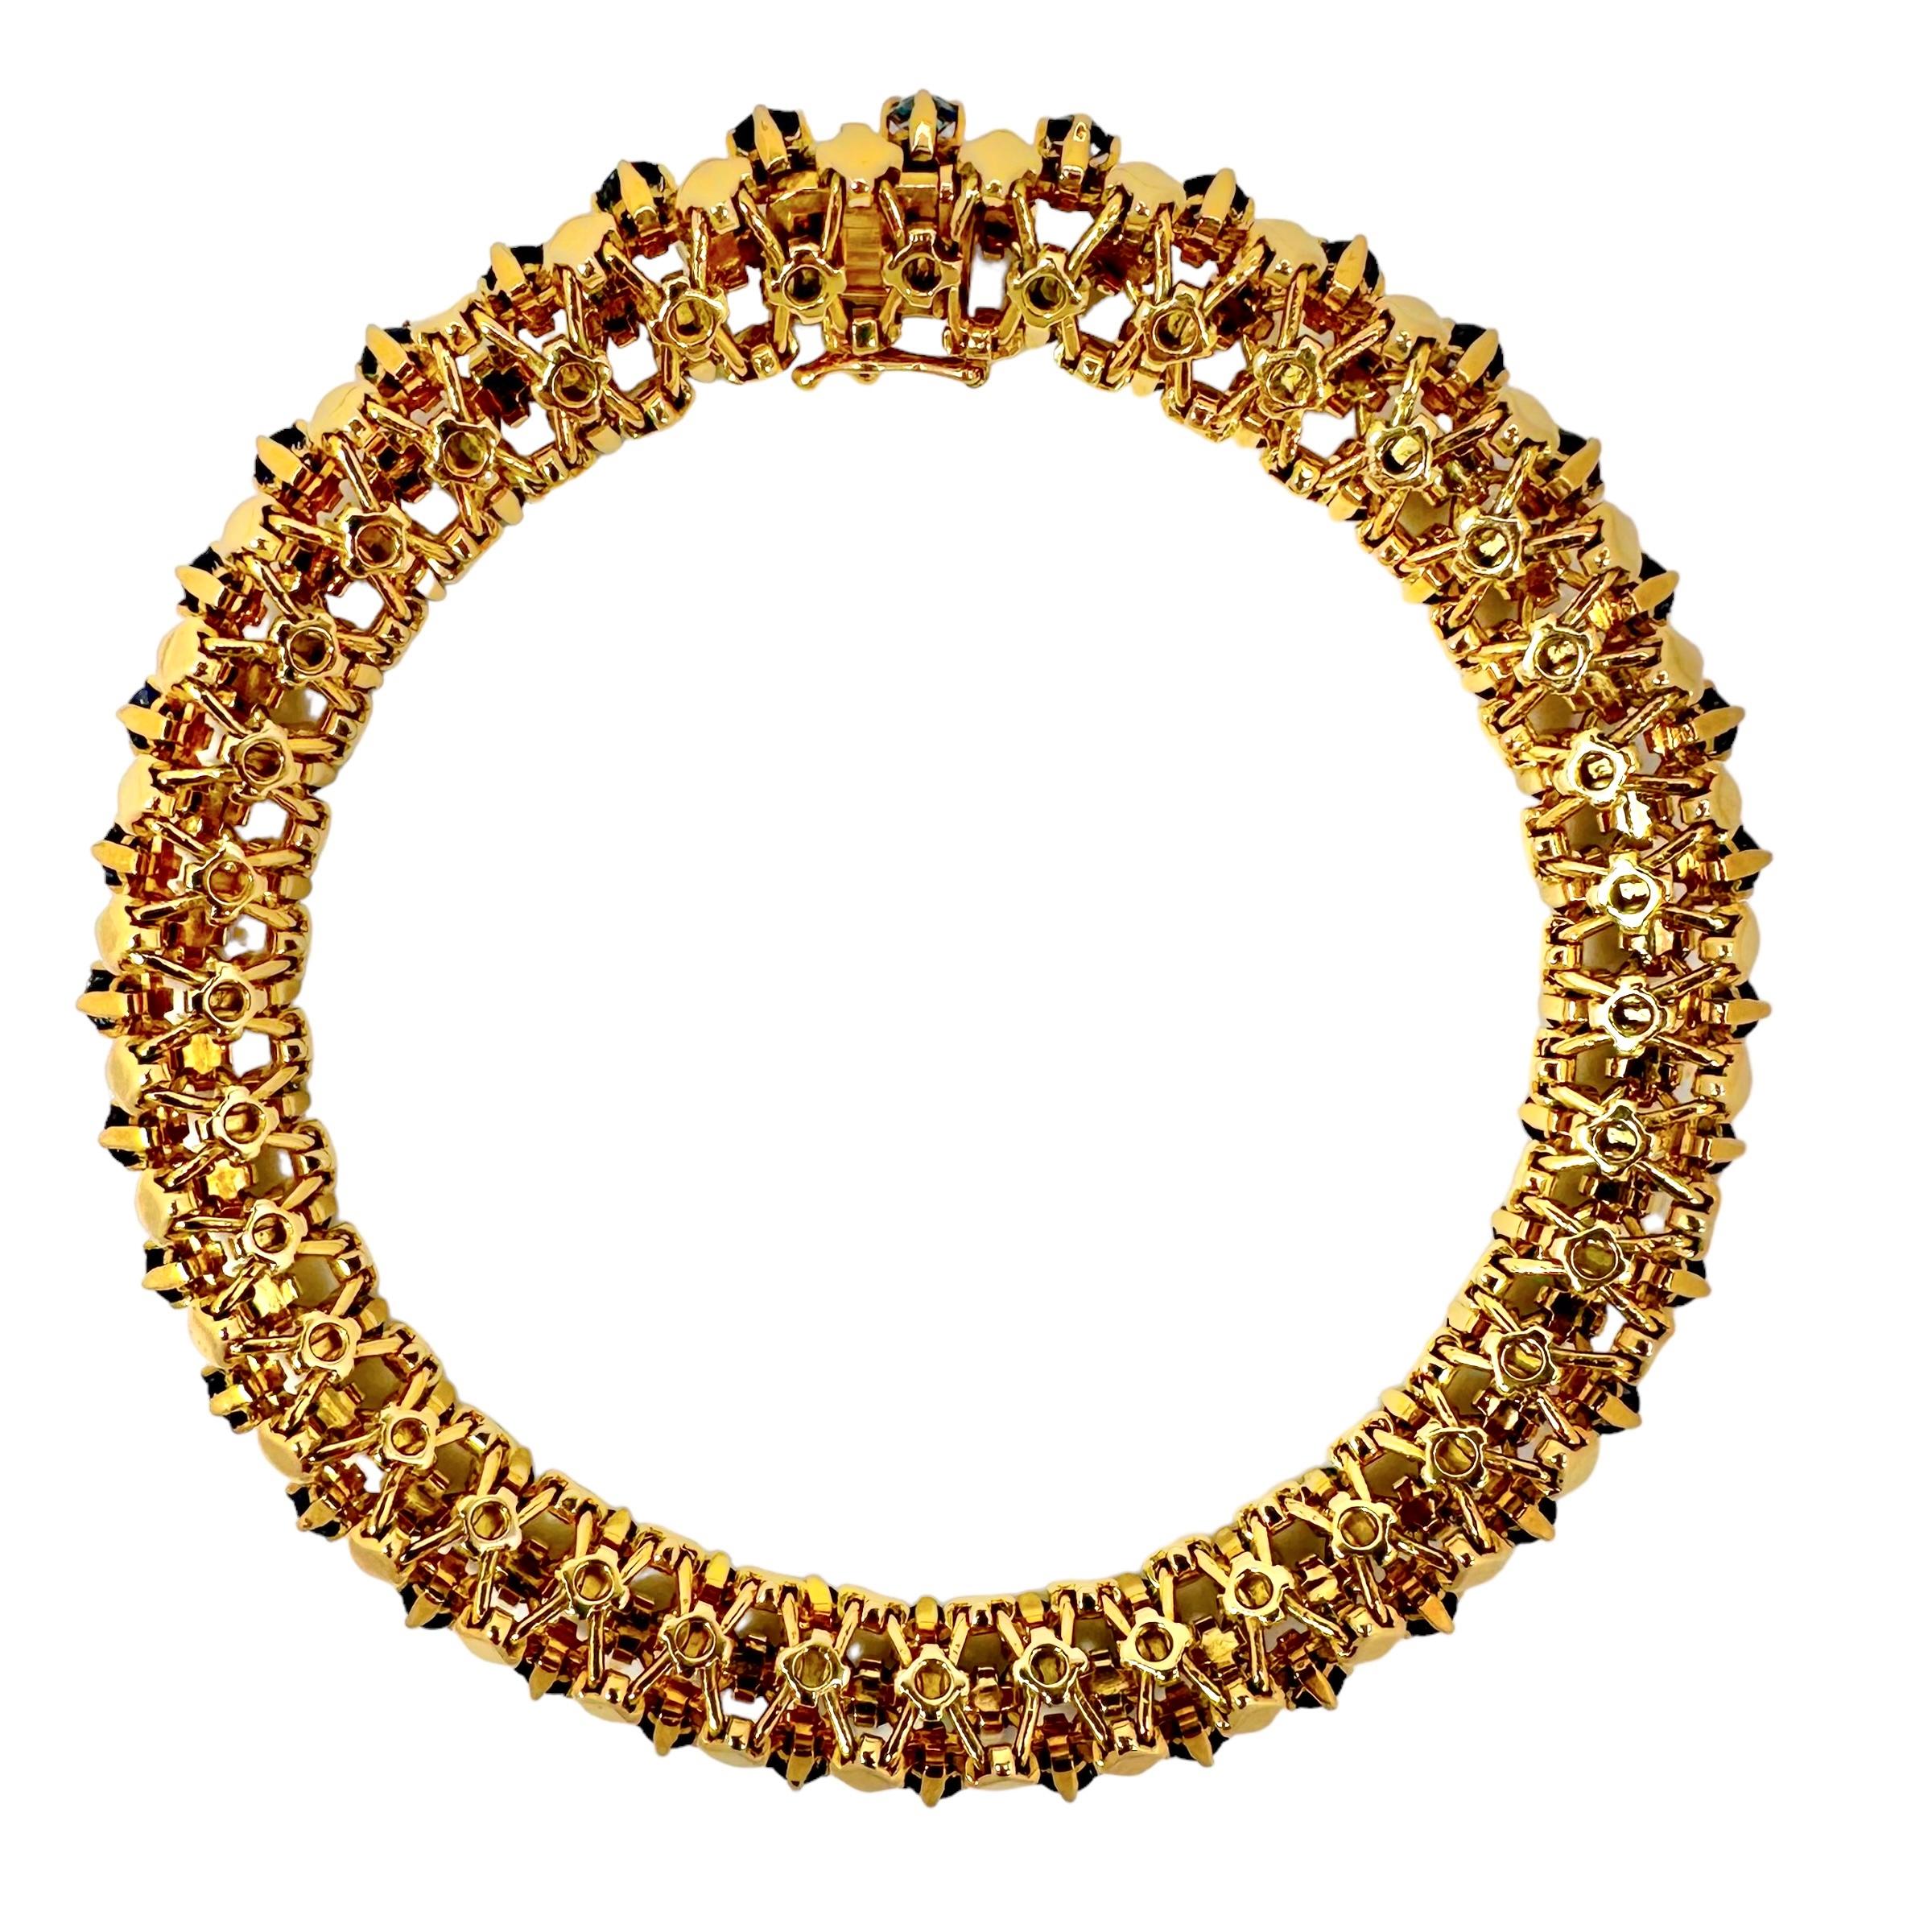 This exquisite, flexible, French Mid-Century 18k gold bracelet is almost entirely hand made and assembled, and displays all of the very best of fine jewelry crafting techniques. Due to its very precise and delicate construction, each and every link